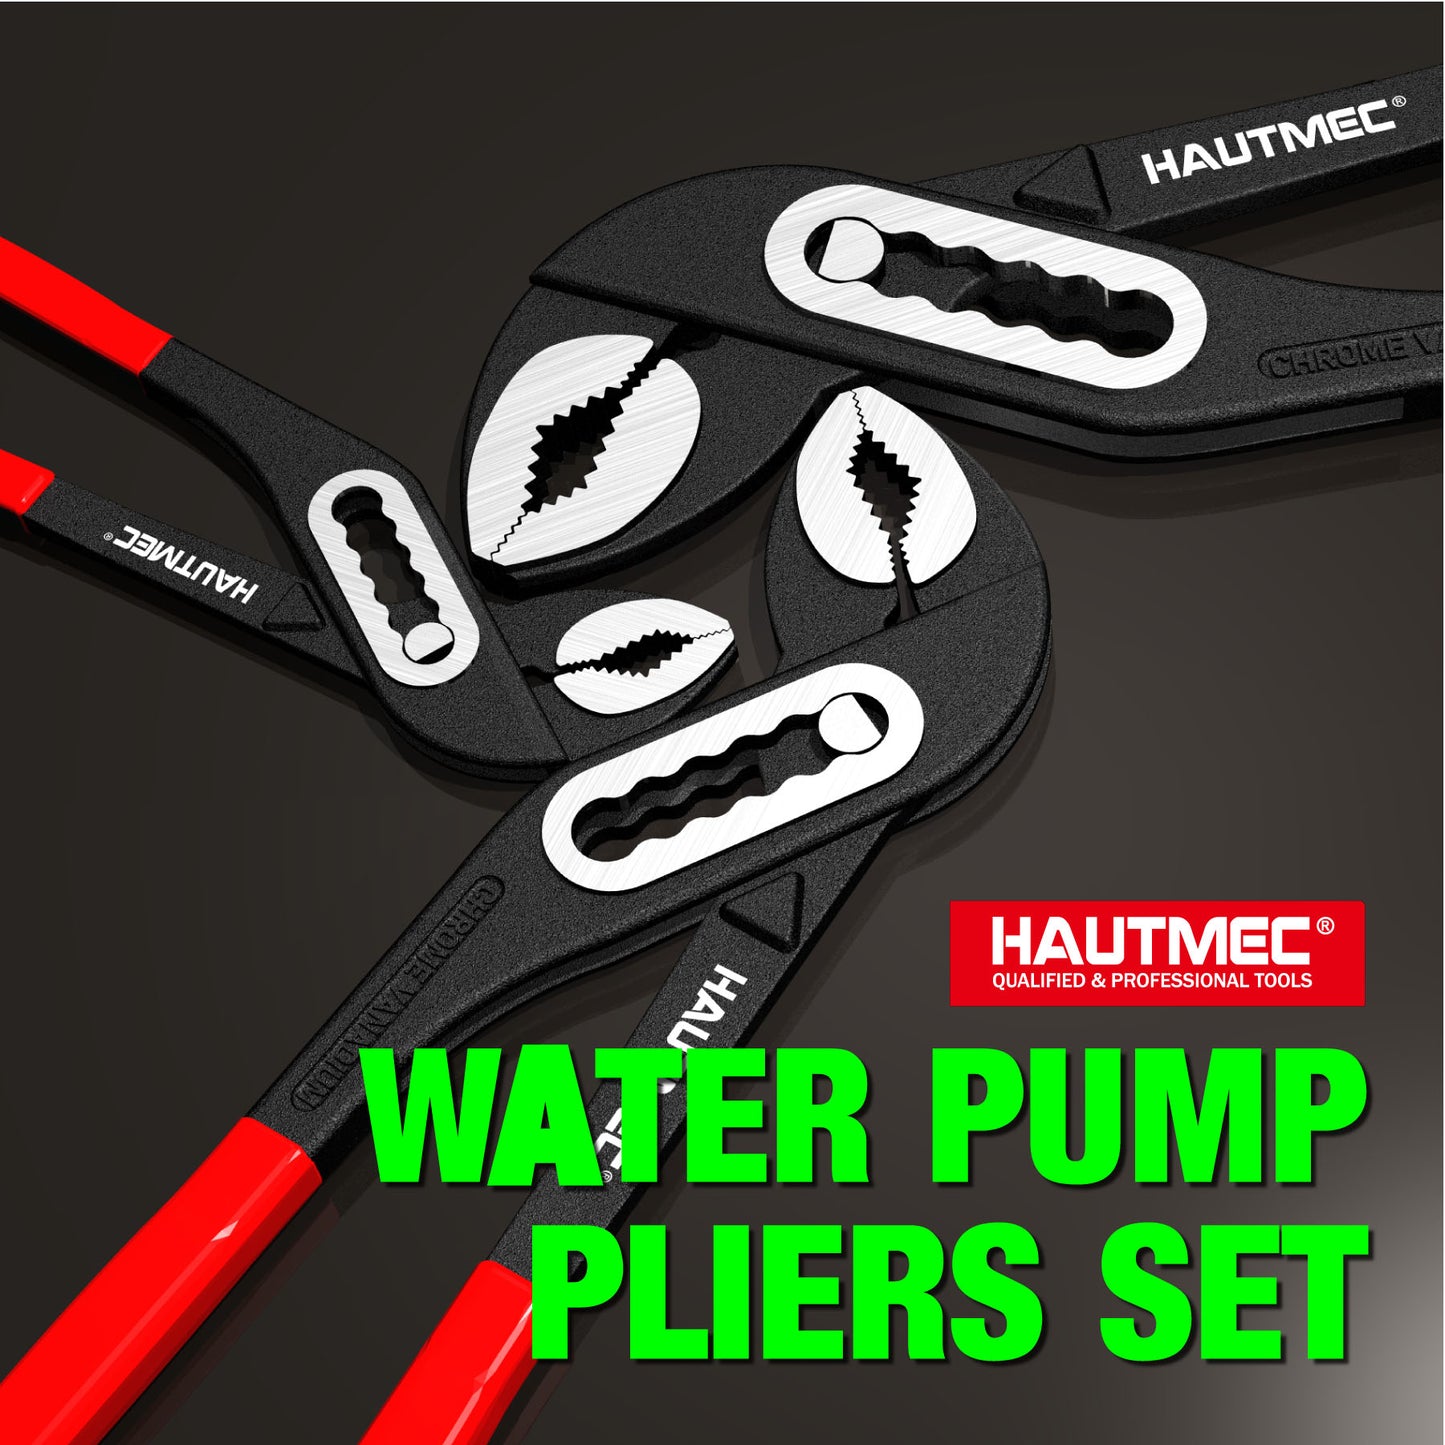 HAUTMEC Water Pump Pliers Set, Wider Opening,Groove Joint Pliers with Curved Jaw and Quick Adjustment Lock for Gripping,Repair,Nuts,Bolts, Pipe,12/10/7 Inch HT0323